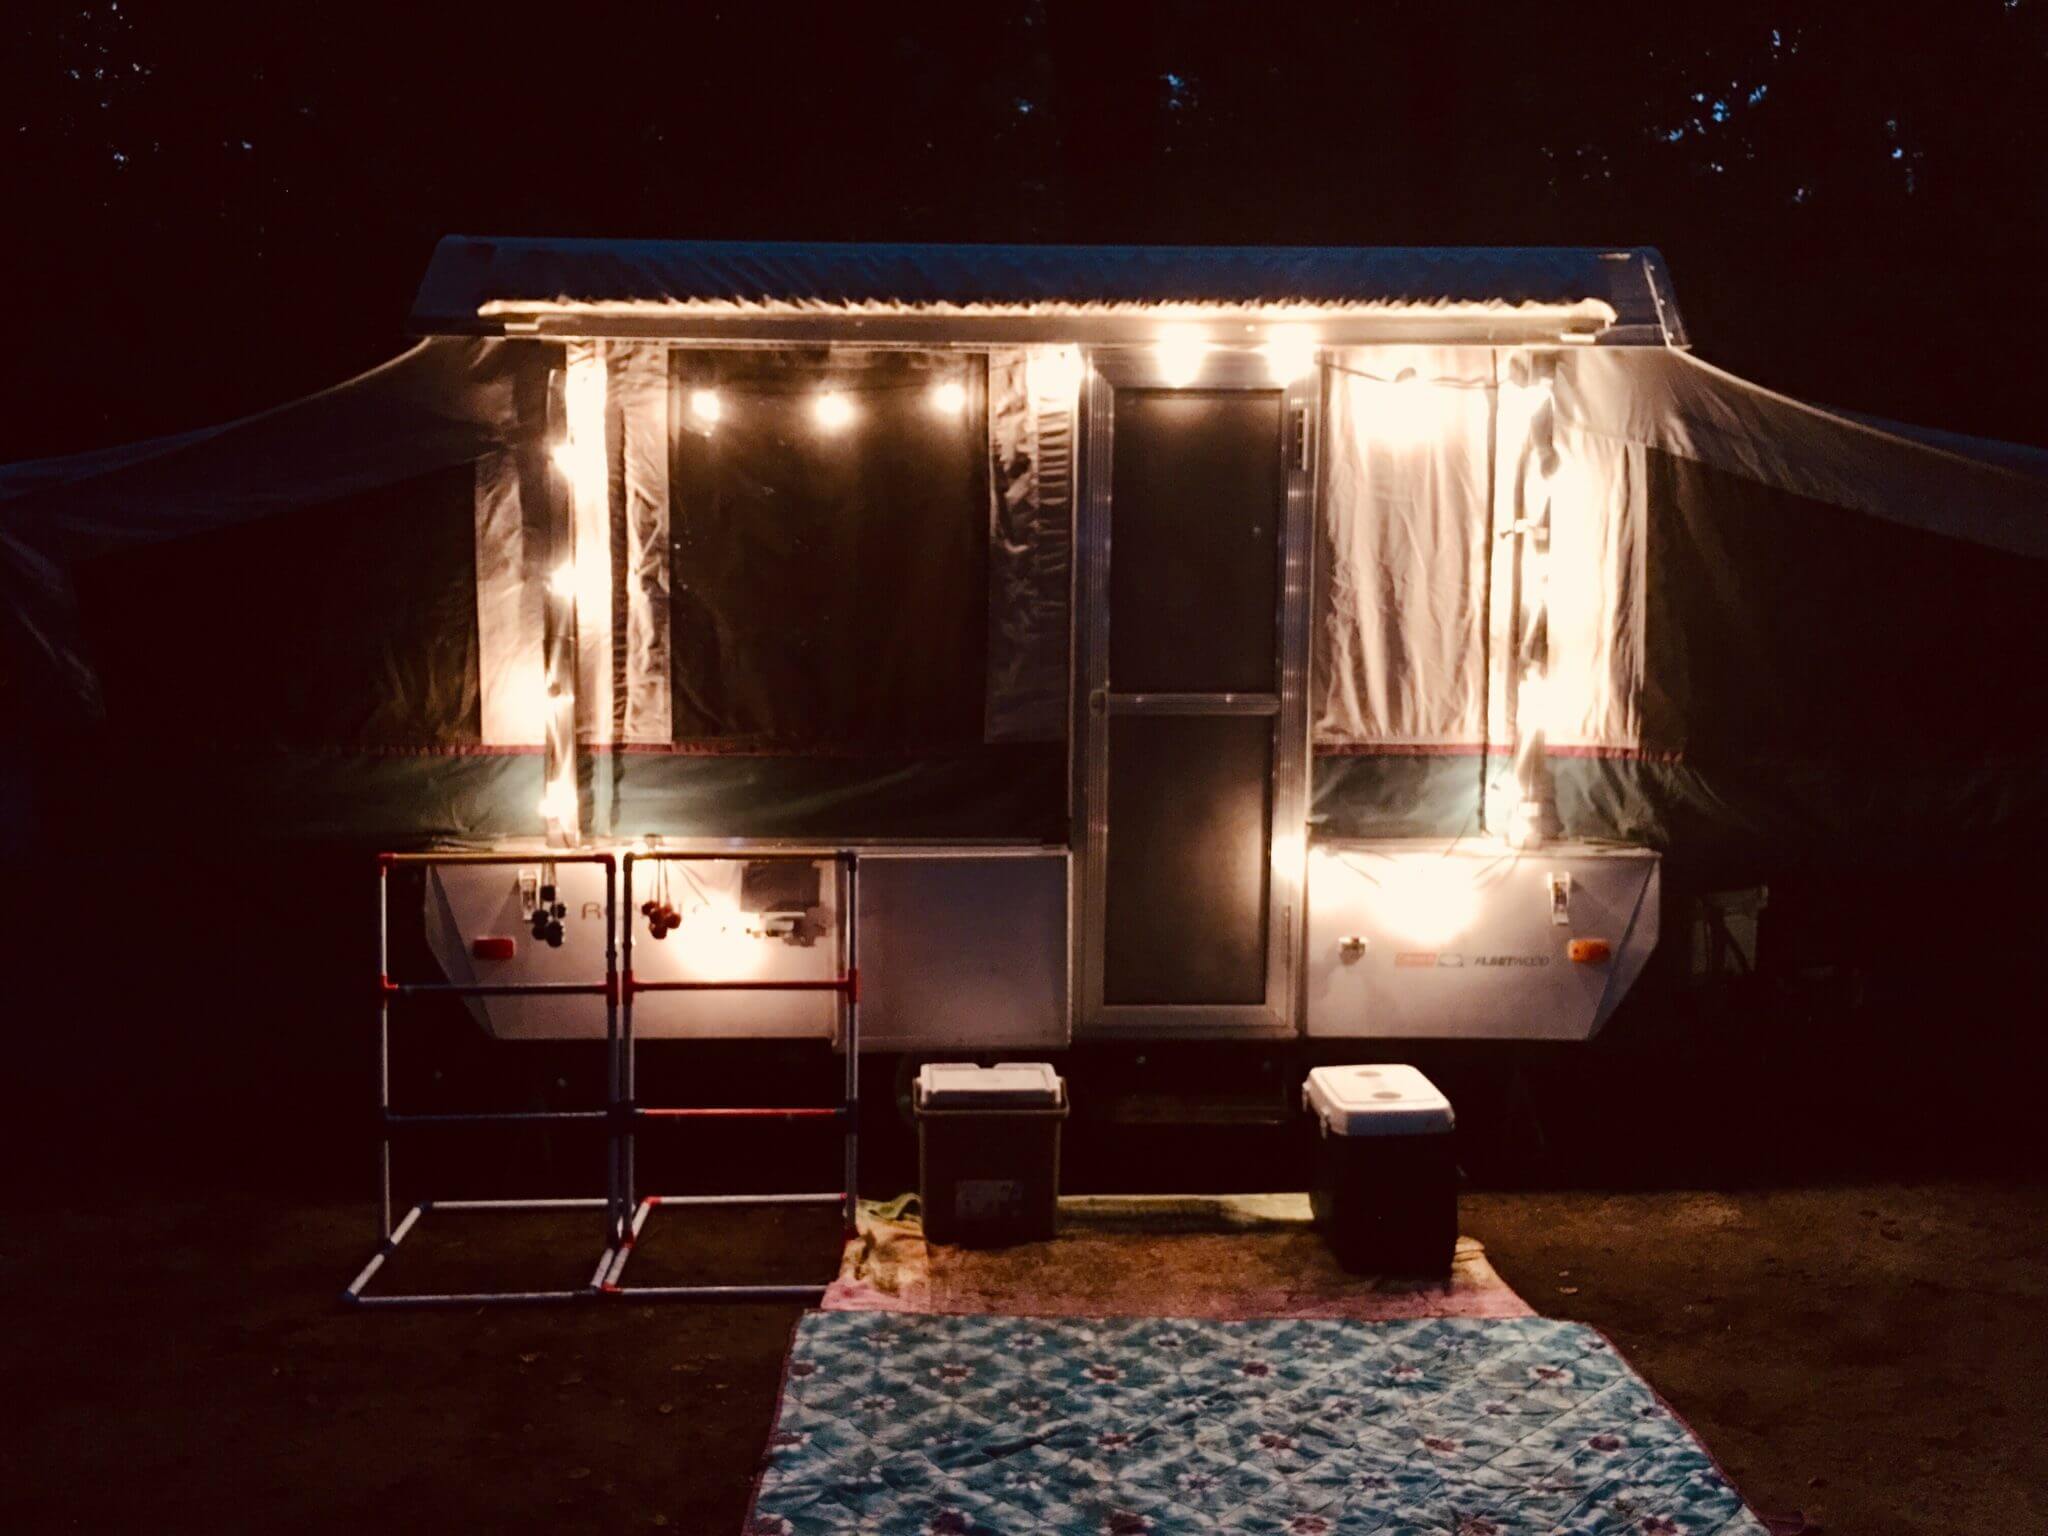 Small camper with bathrooms at night with string lights outside